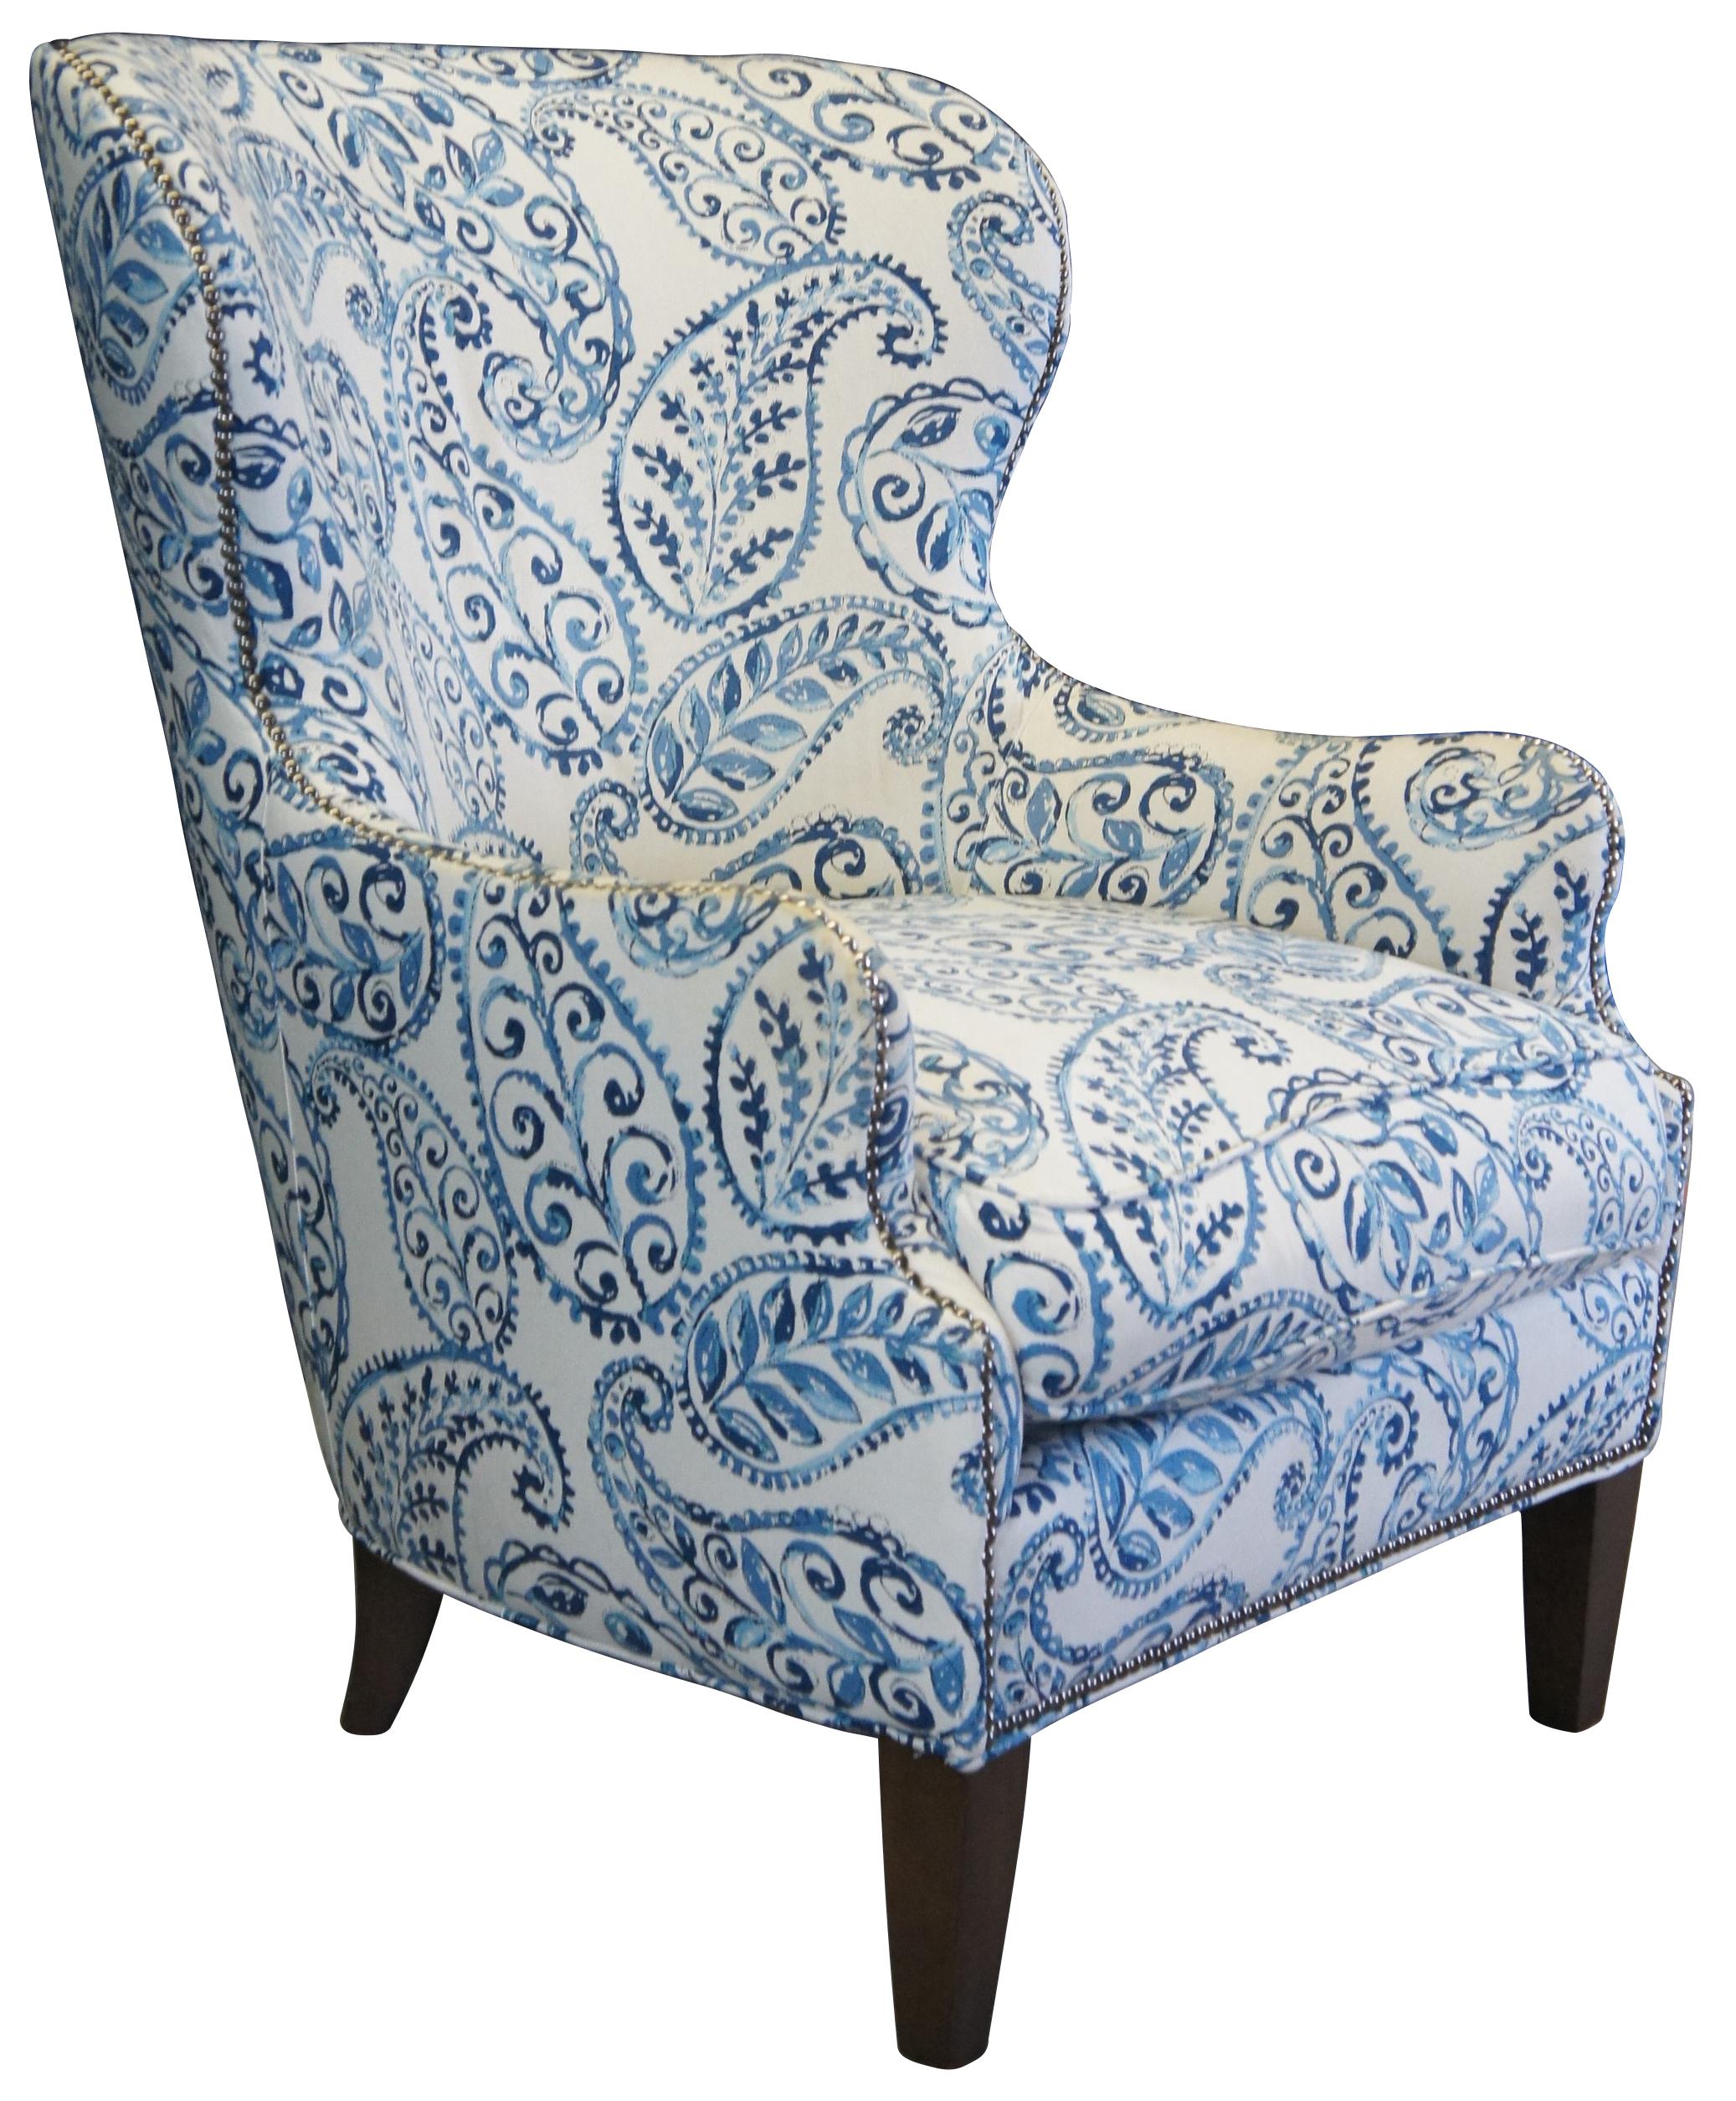 An over scaled paisley print makes the Brielle wing chair an instant statement piece for the living room. Comfortable and conversation-worthy, this updated, classic wingback chair is outlined by hand-applied, platinum-finished nailheads that trace